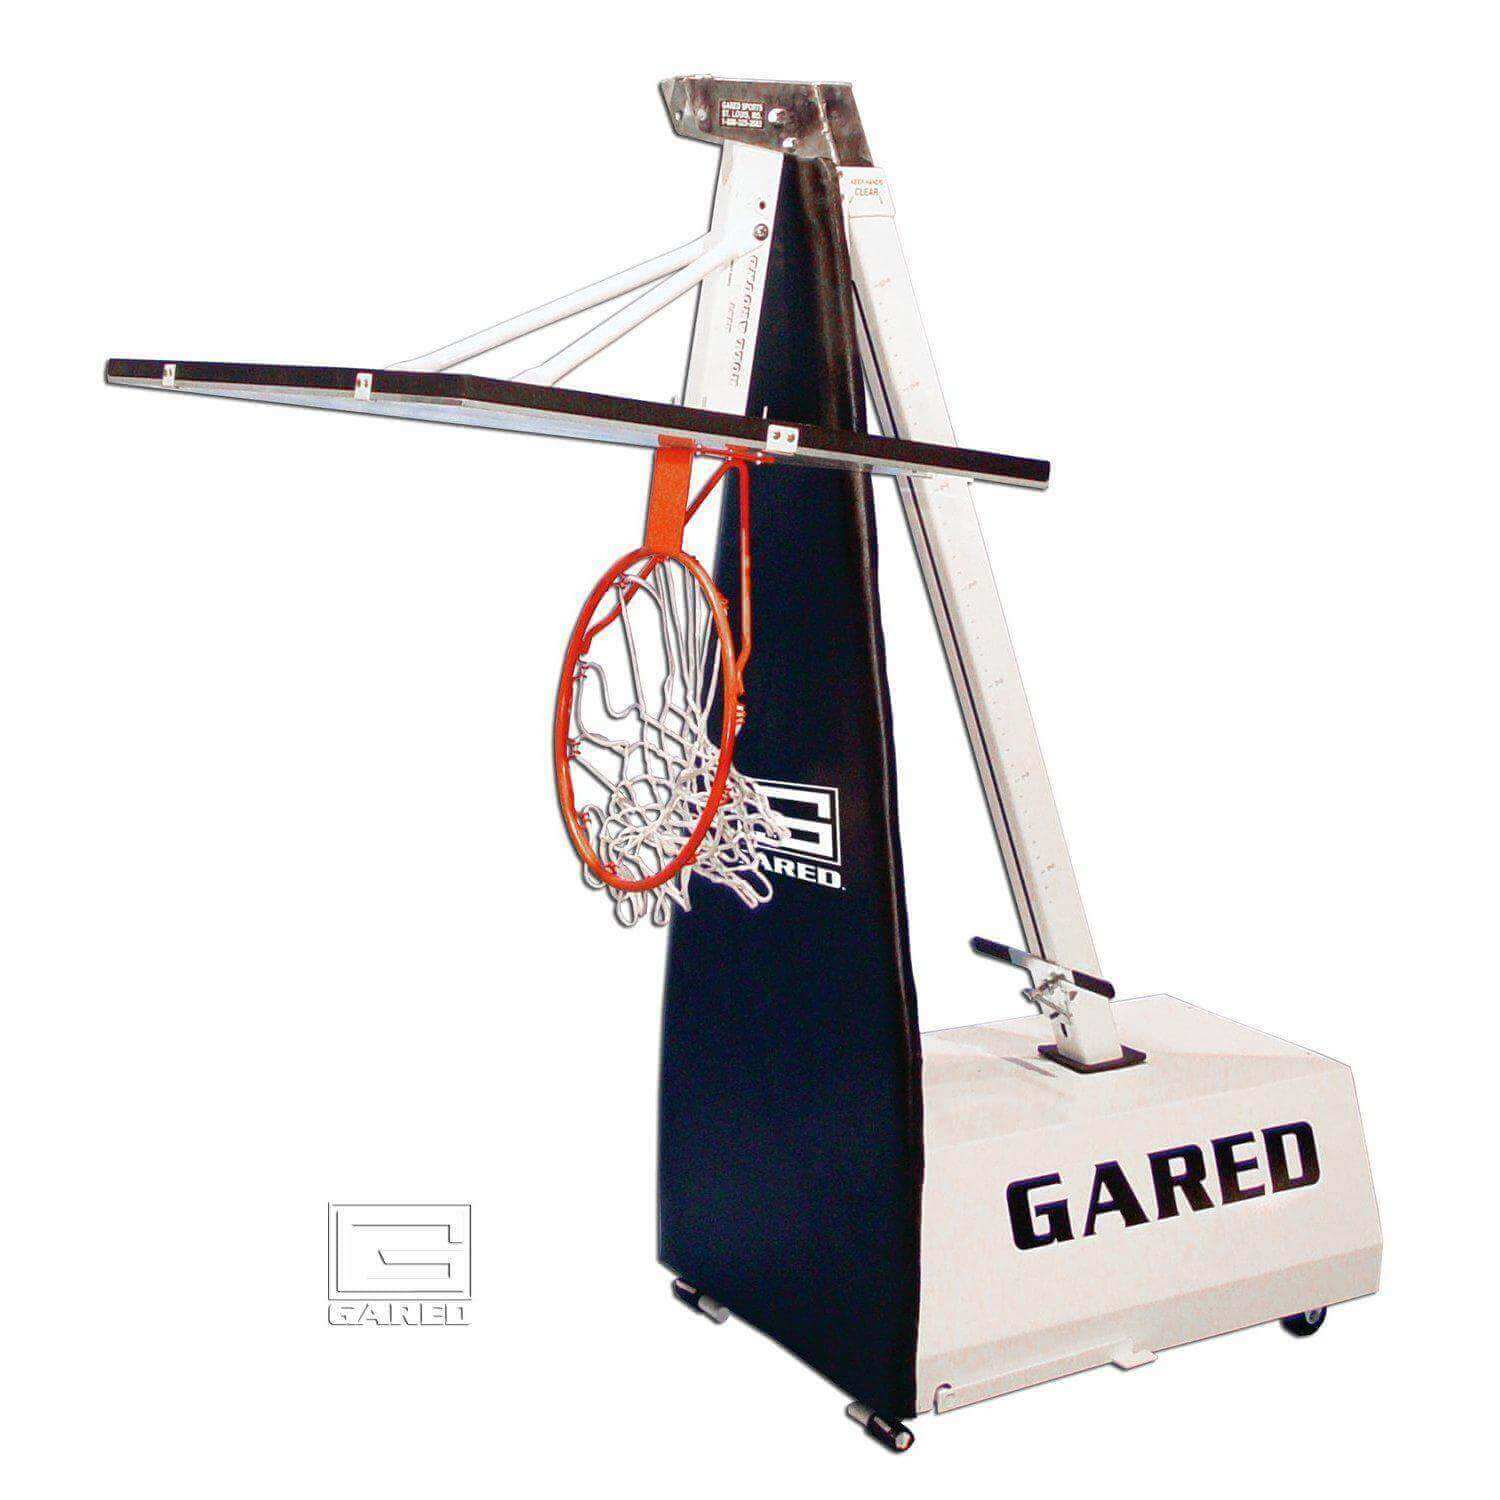 Gared Sports Recreational Roll-Around Portable Basketball Hoops